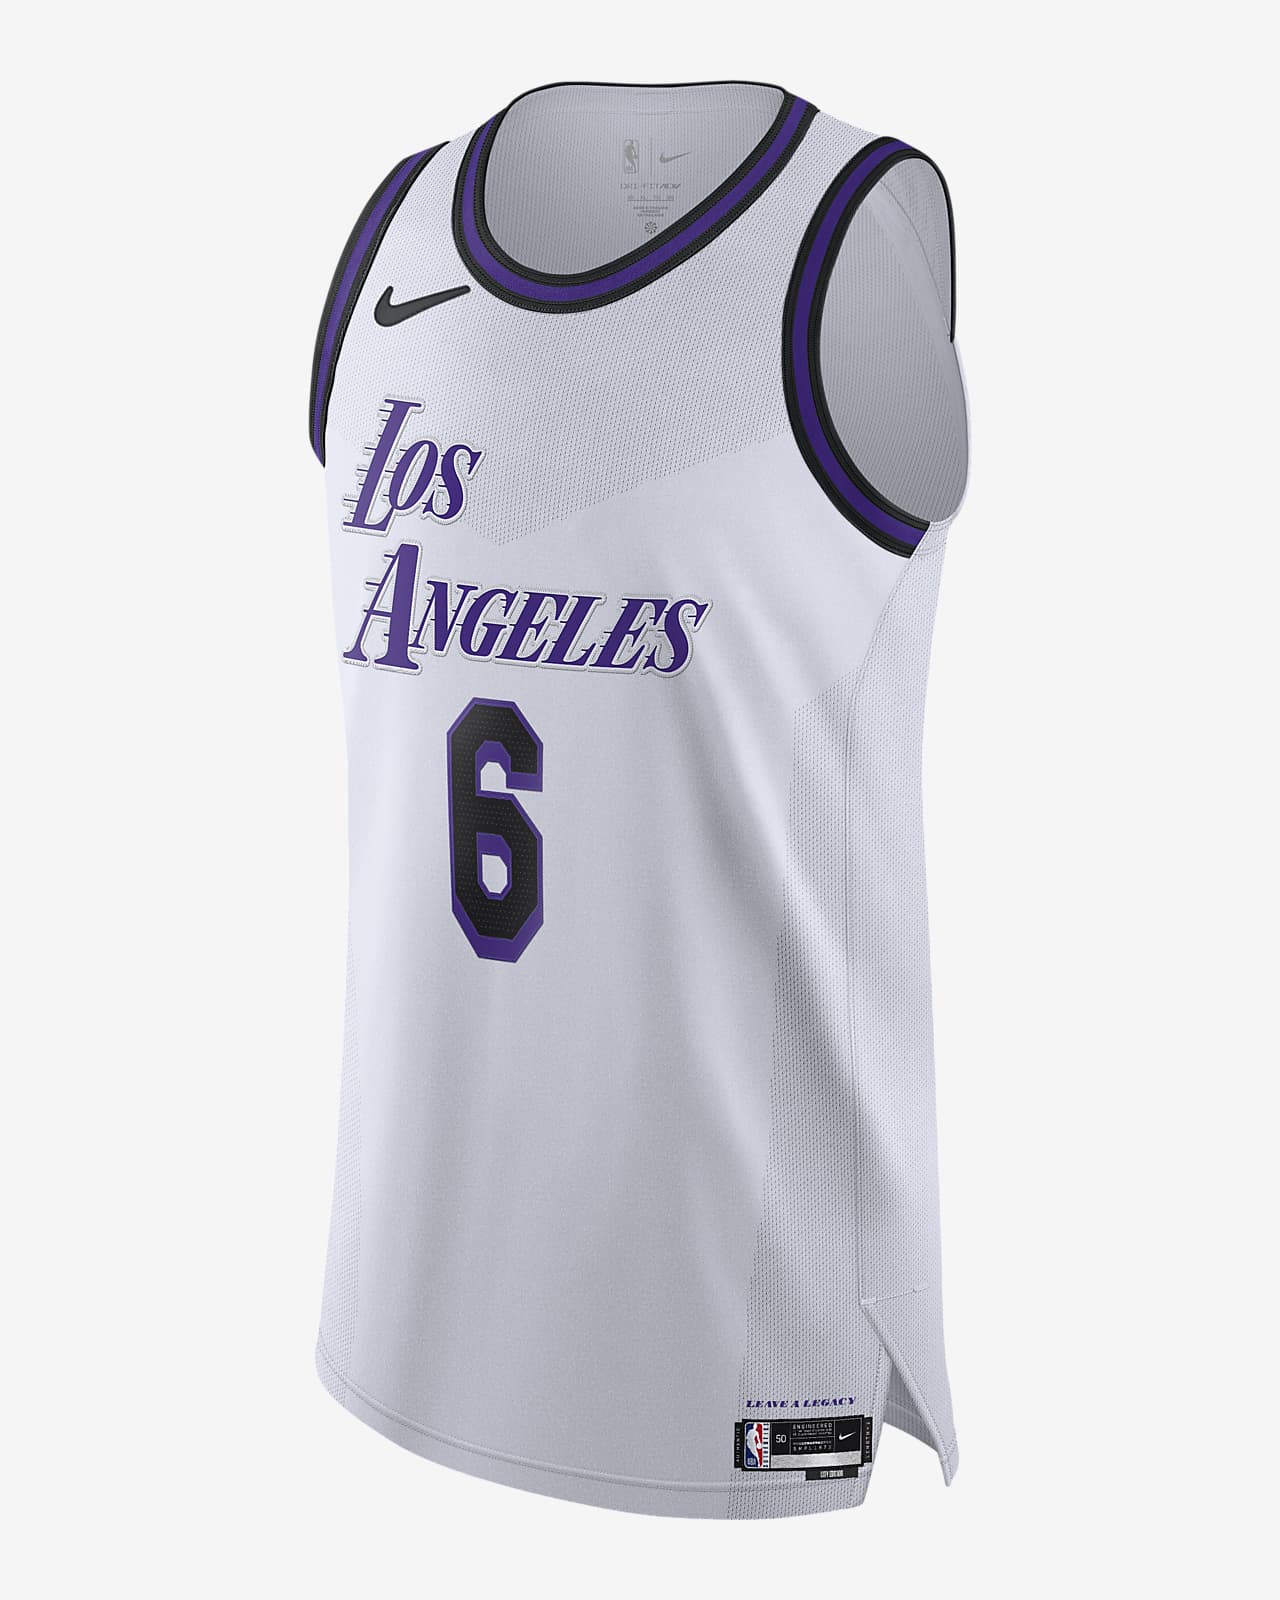 Jersey Nike Dri-FIT ADV NBA Authentic para hombre Los Angeles Lakers City  Edition. 